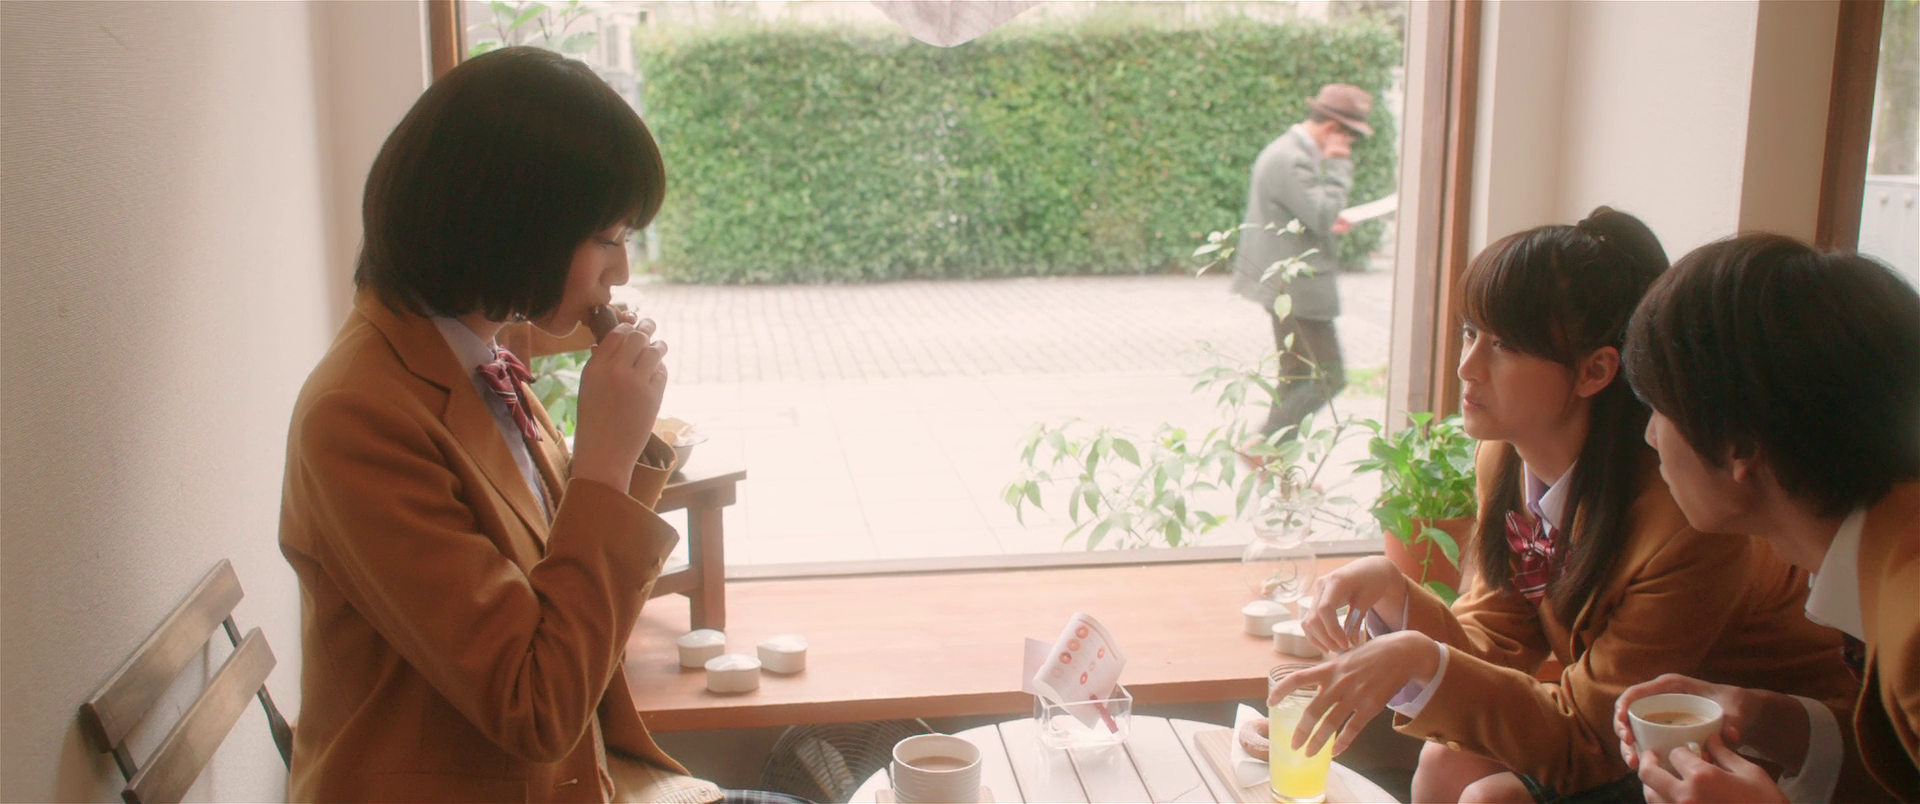  A.Short.Distance.Relationship.2014.JAPANESE.1080p.BluRay.x264.DTS-WiKi 8.7-2.png